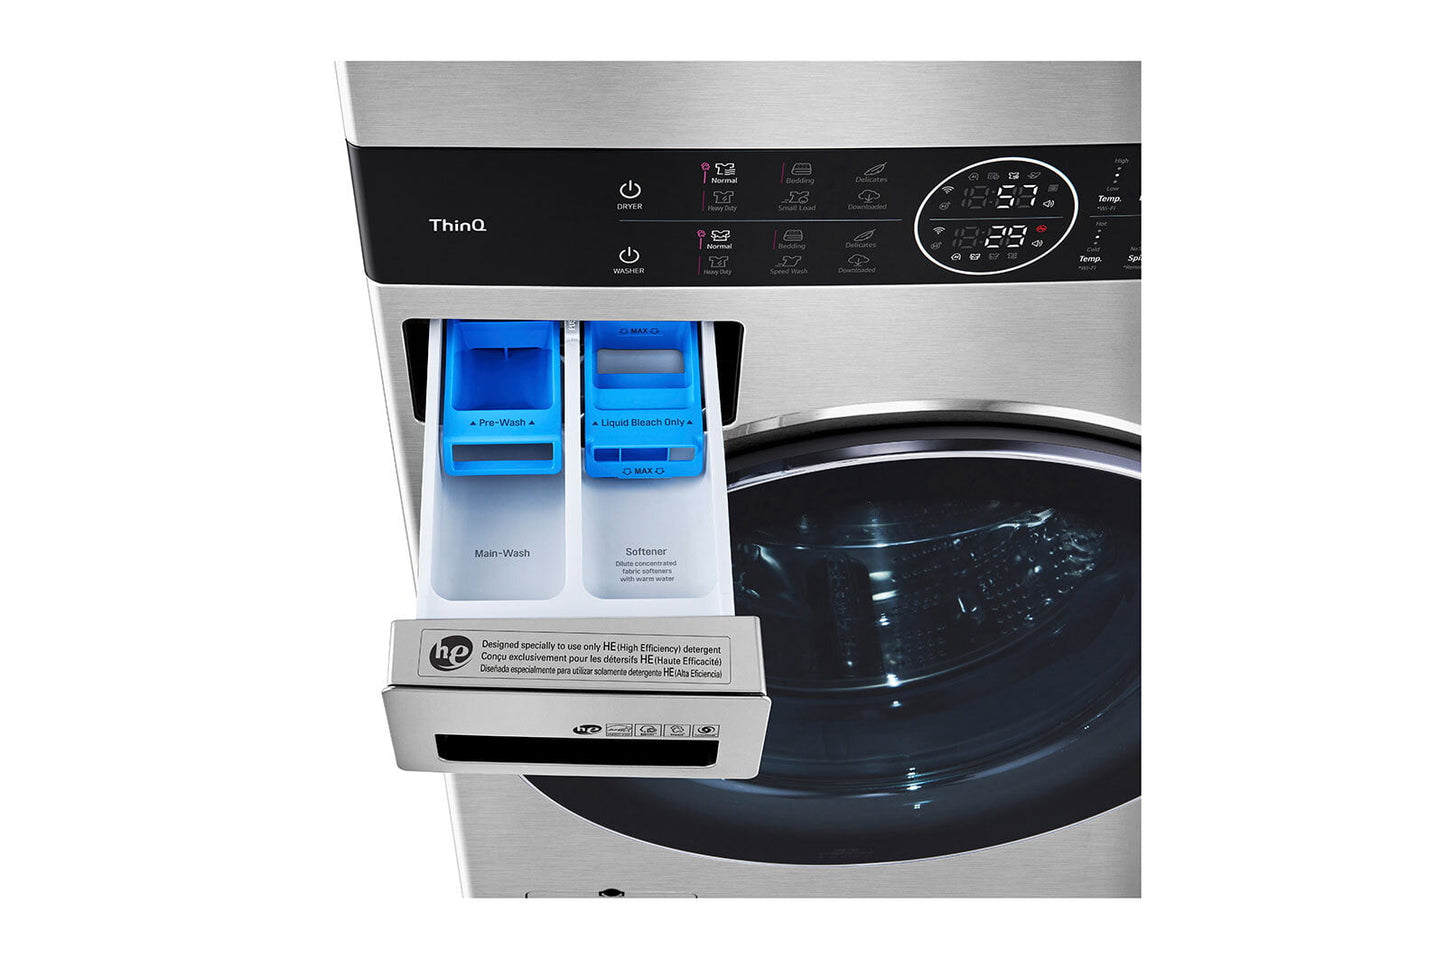 Lg WSEX200HNA Lg Studio Single Unit Front Load Washtower&#8482; With Center Control&#8482; 5.0 Cu. Ft. Washer And 7.4 Cu. Ft. Electric Dryer